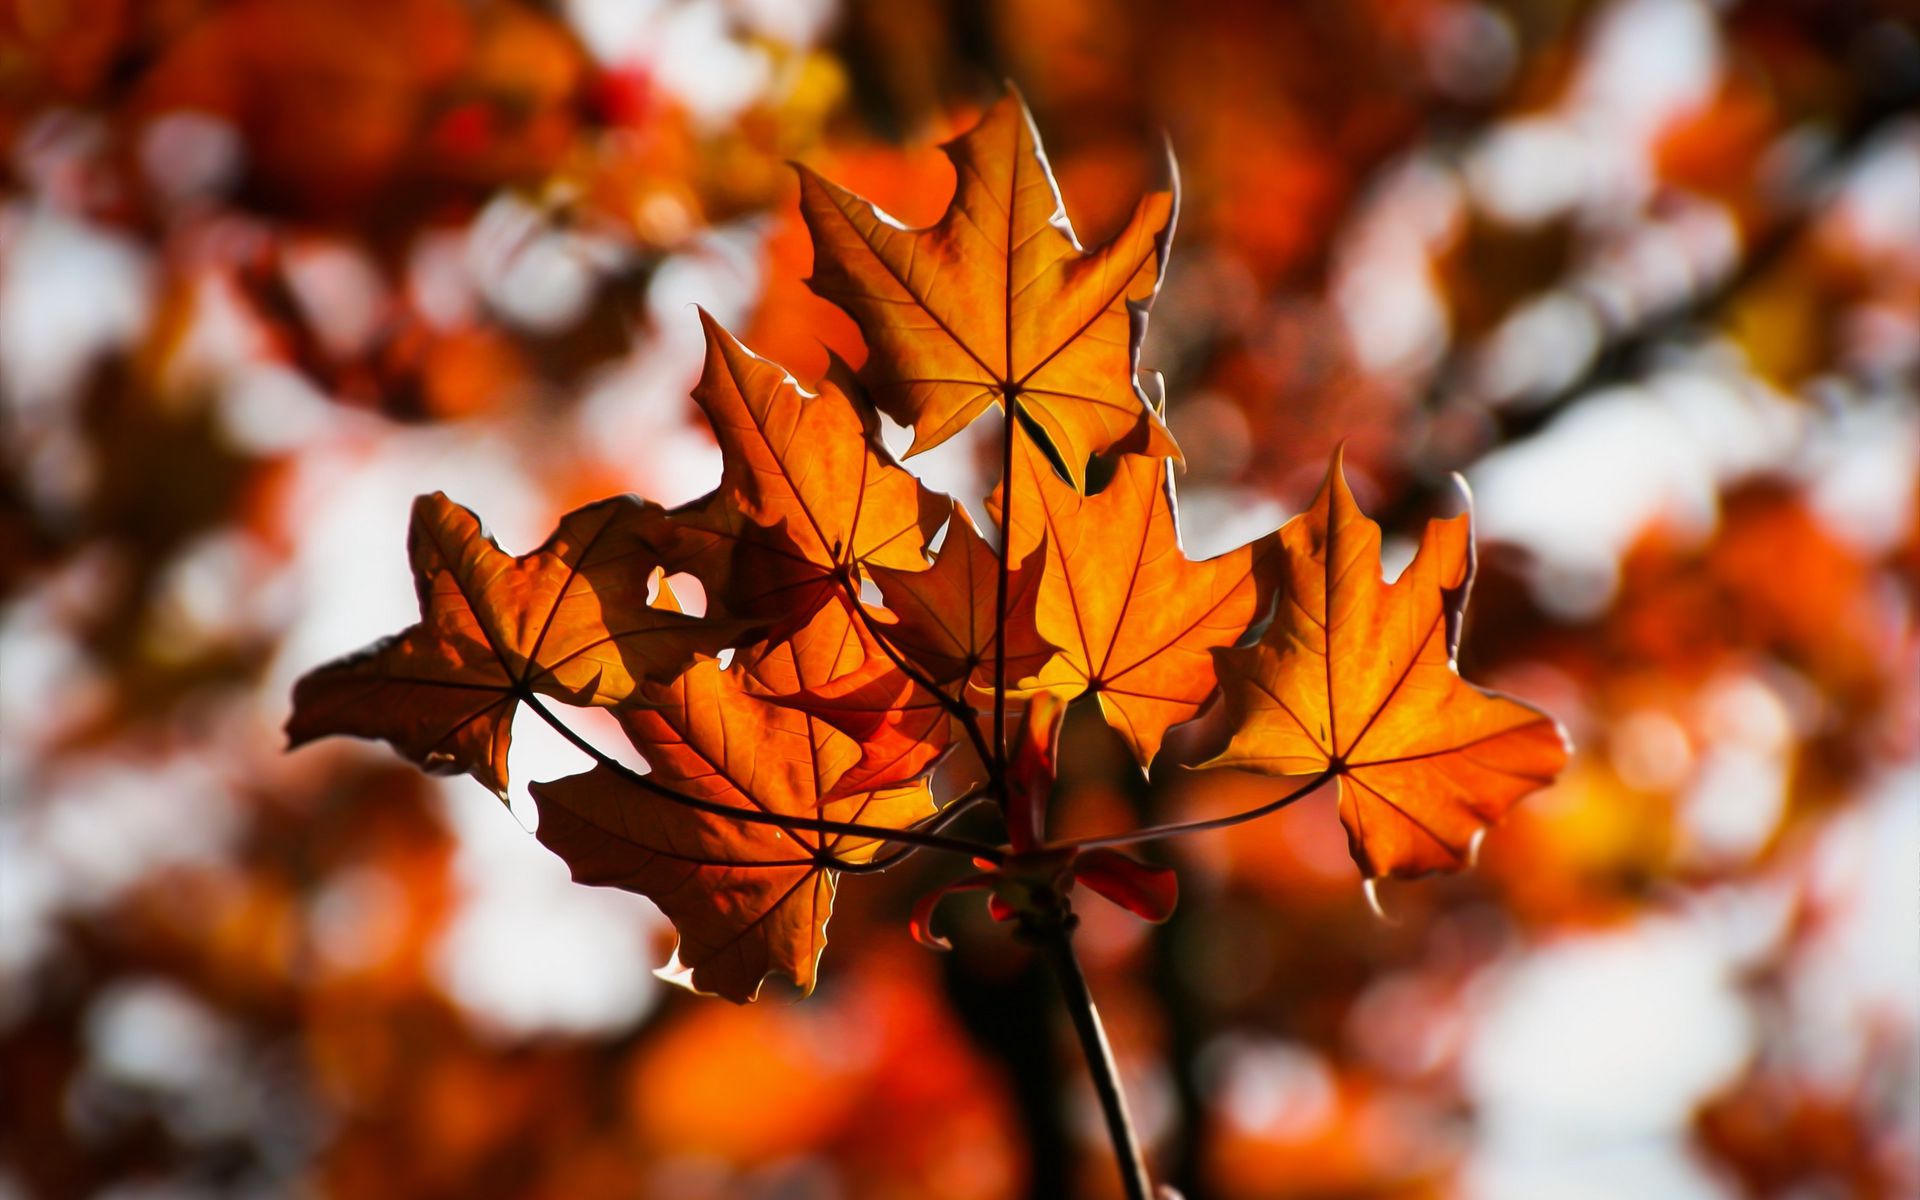 Download Wallpaper 1920x1200 Leaves Maple Blurring Widescreen 1610